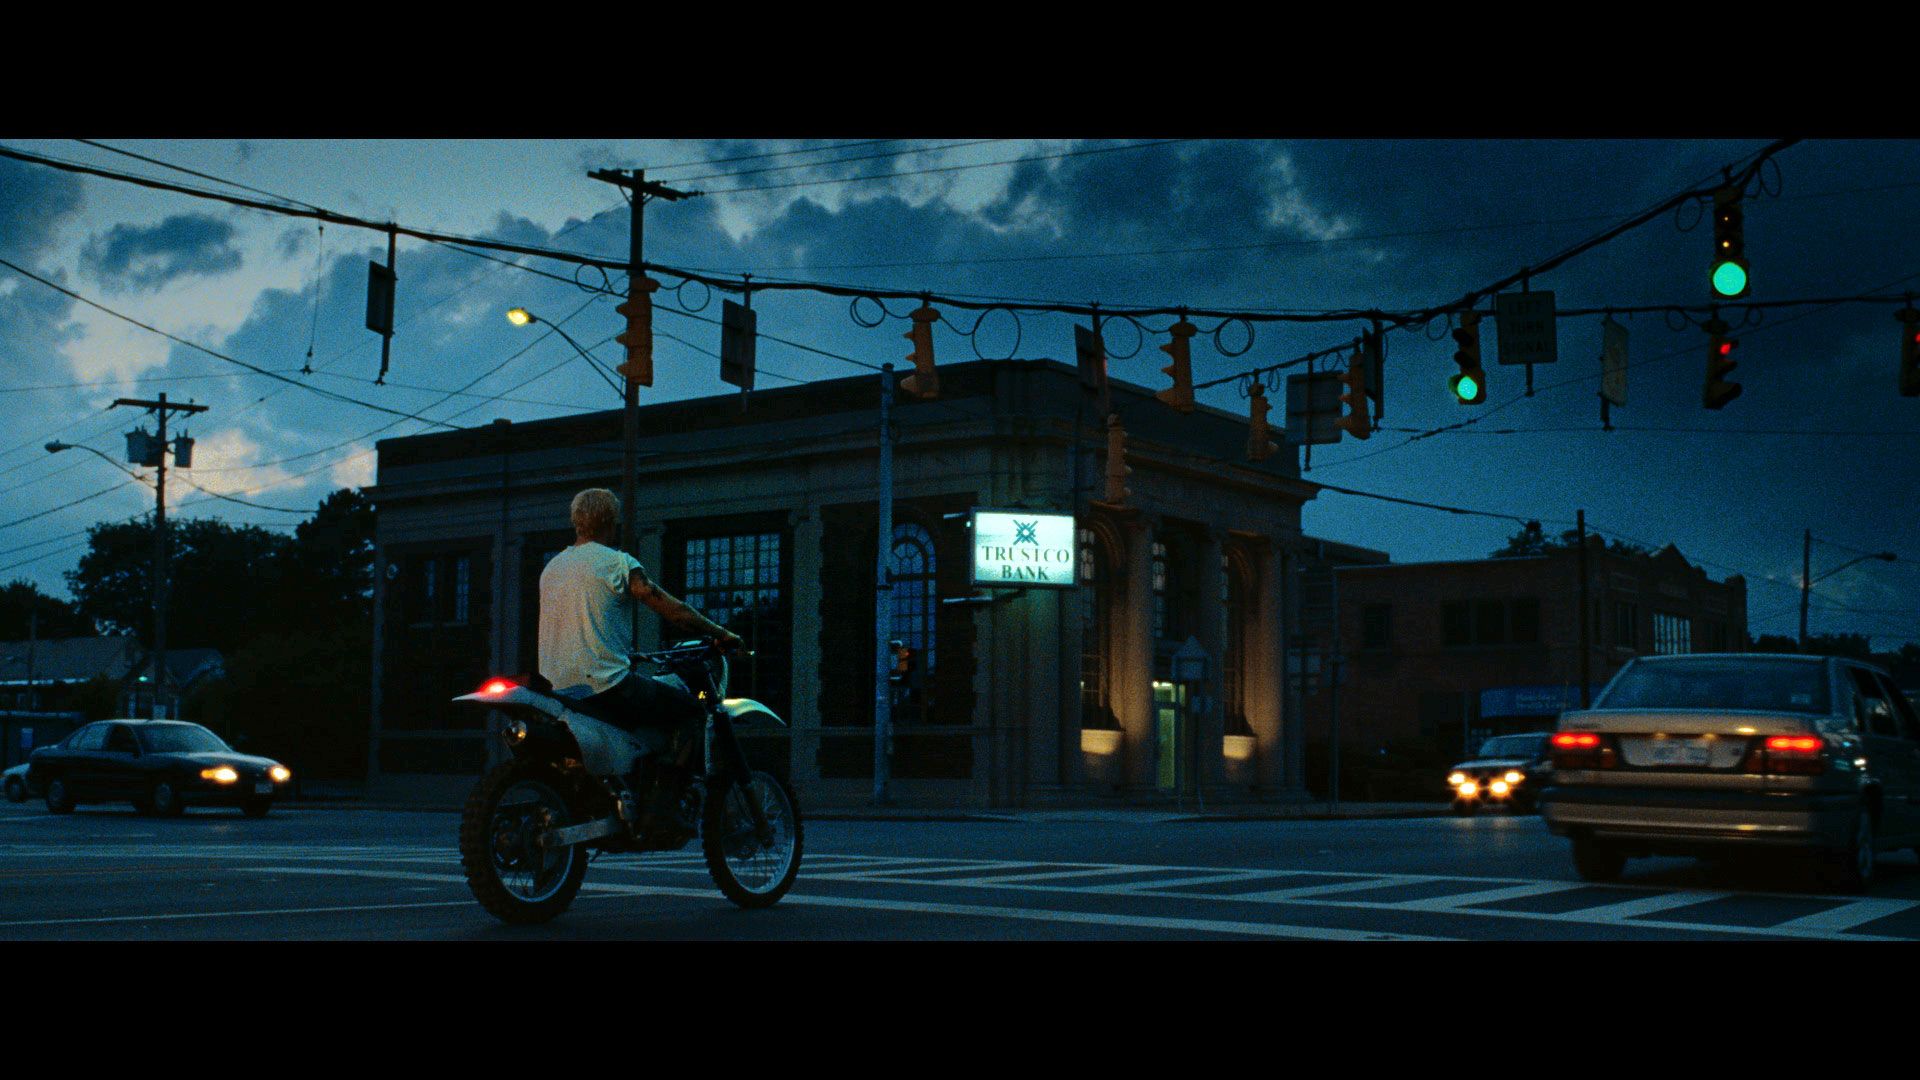 Place Beyond the Pines Motorcycle Wallpaper. Batman Beyond Wallpaper, Beyond the Lights Wallpaper and Beyond Wonderland Wallpaper